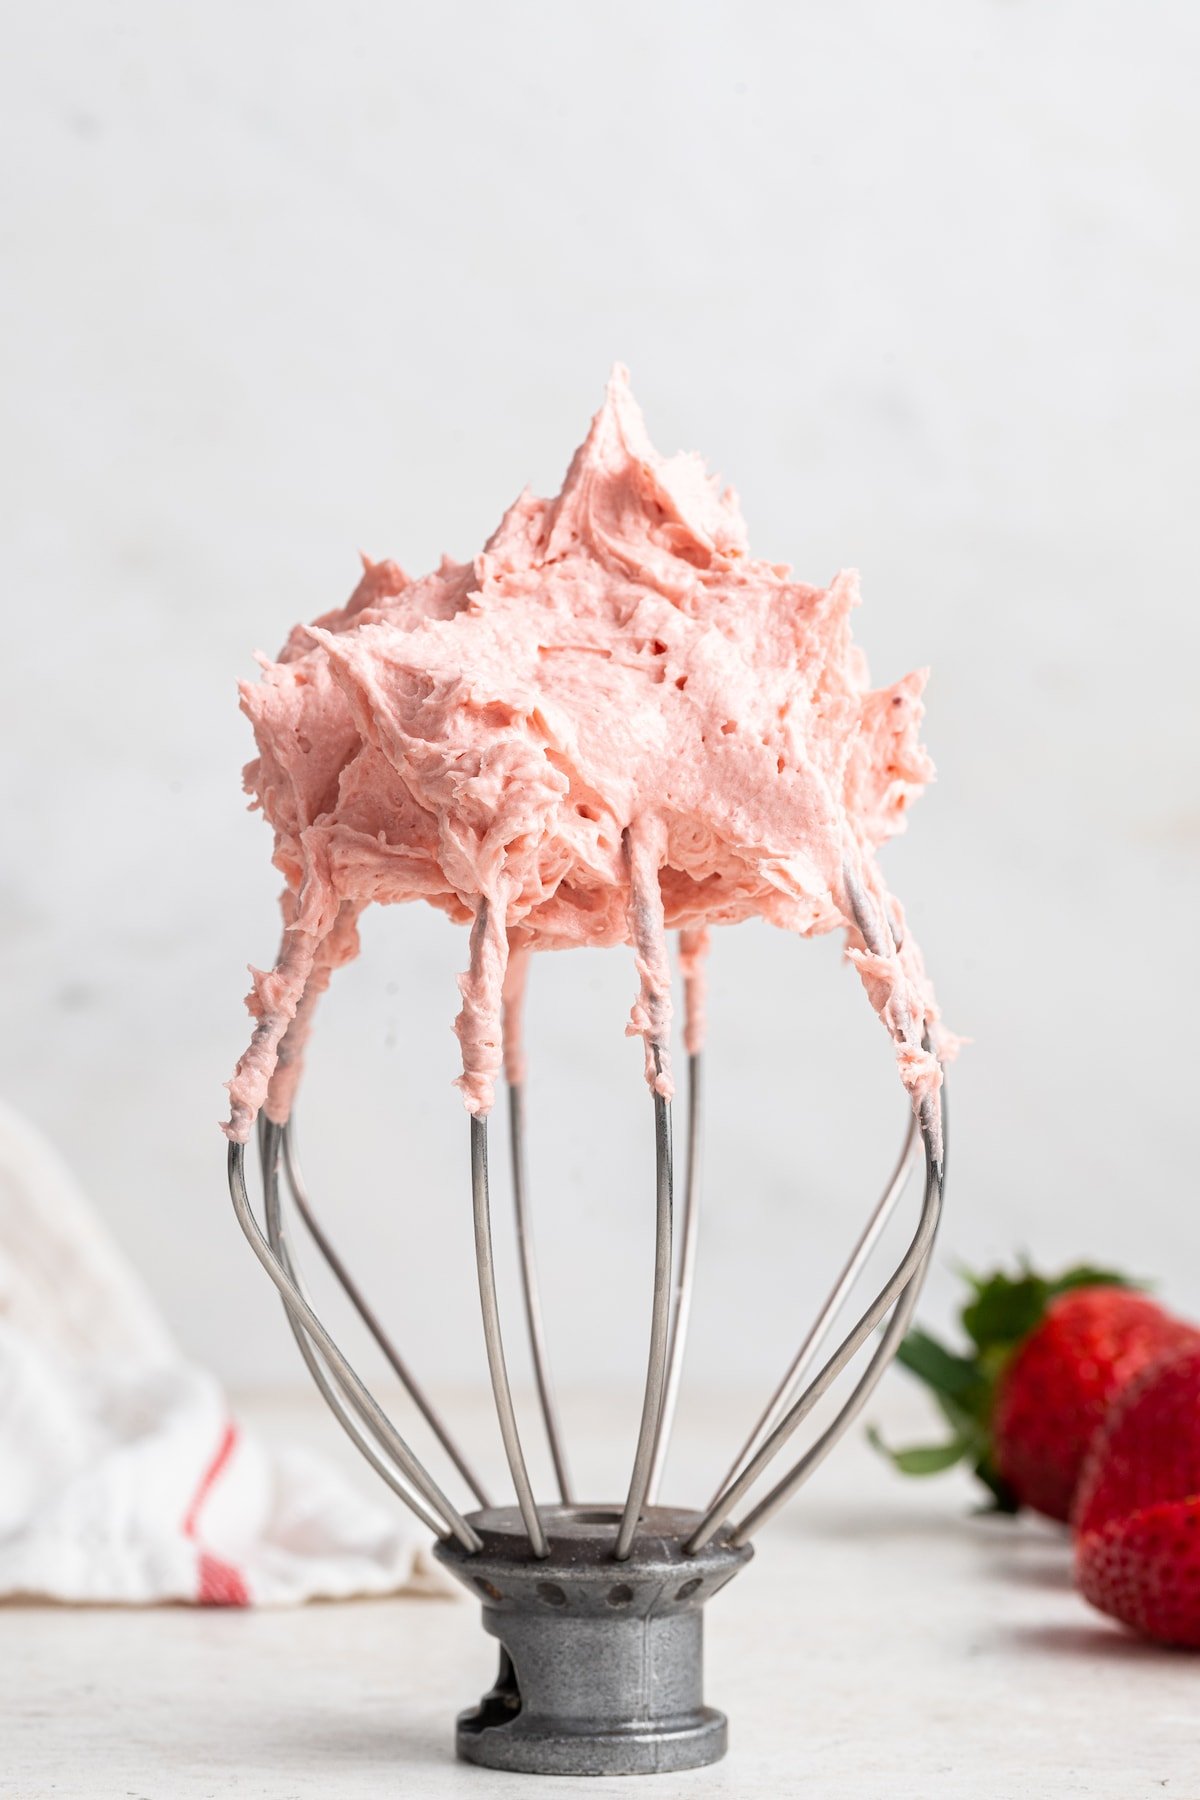 A kitchenmaid whisk standing upright with a lot of strawberry buttercream frosting on top.